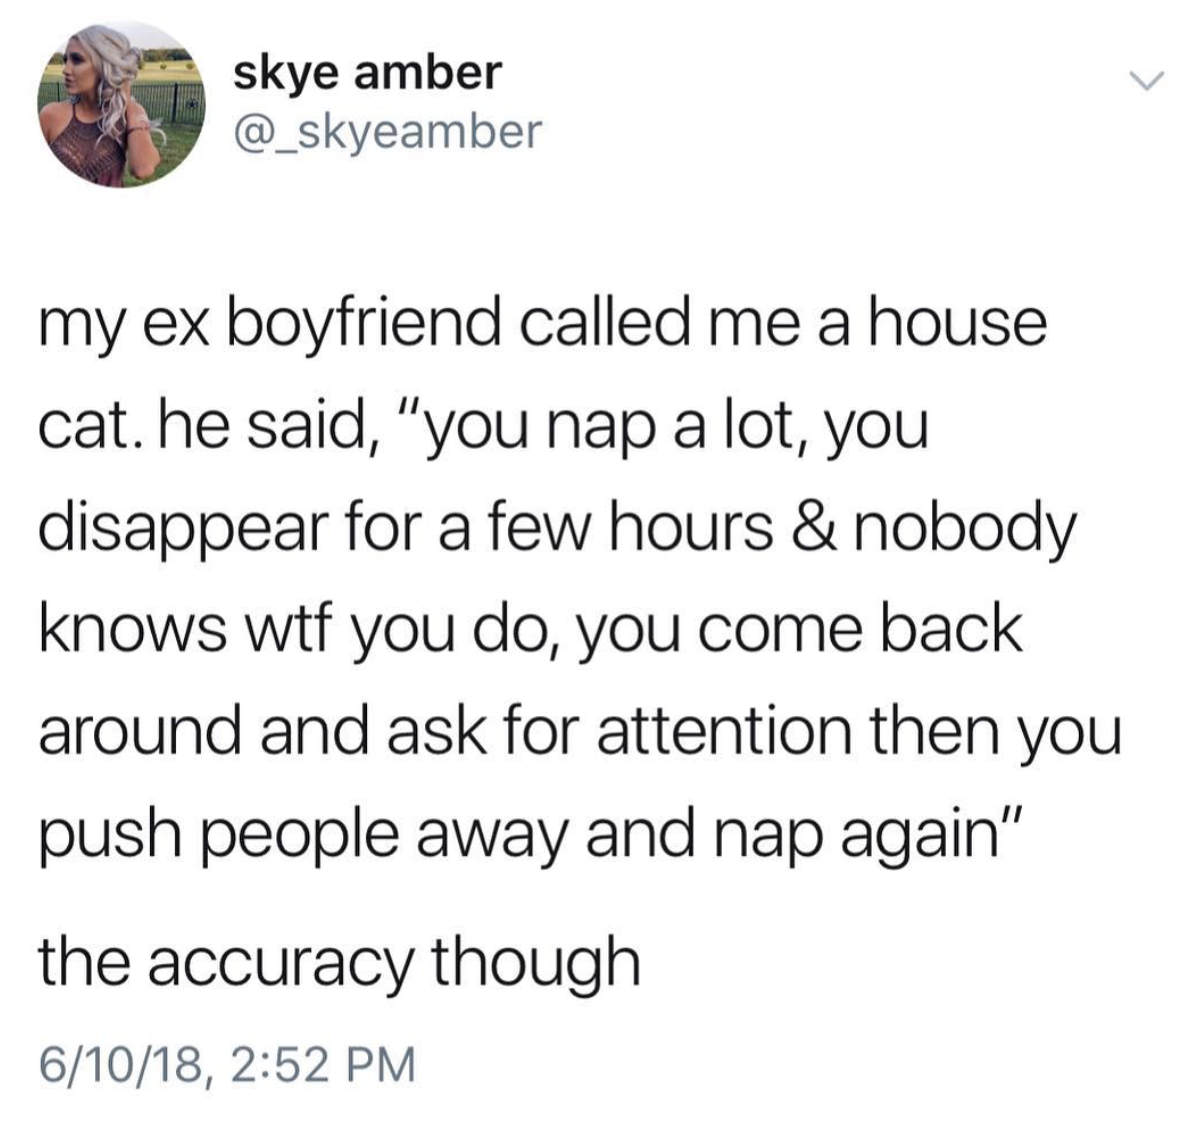 girls supporting girls tumblr posts - skye amber my ex boyfriend called me a house cat. he said, "you nap a lot, you disappear for a few hours & nobody knows wtf you do, you come back around and ask for attention then you push people away and nap again" t